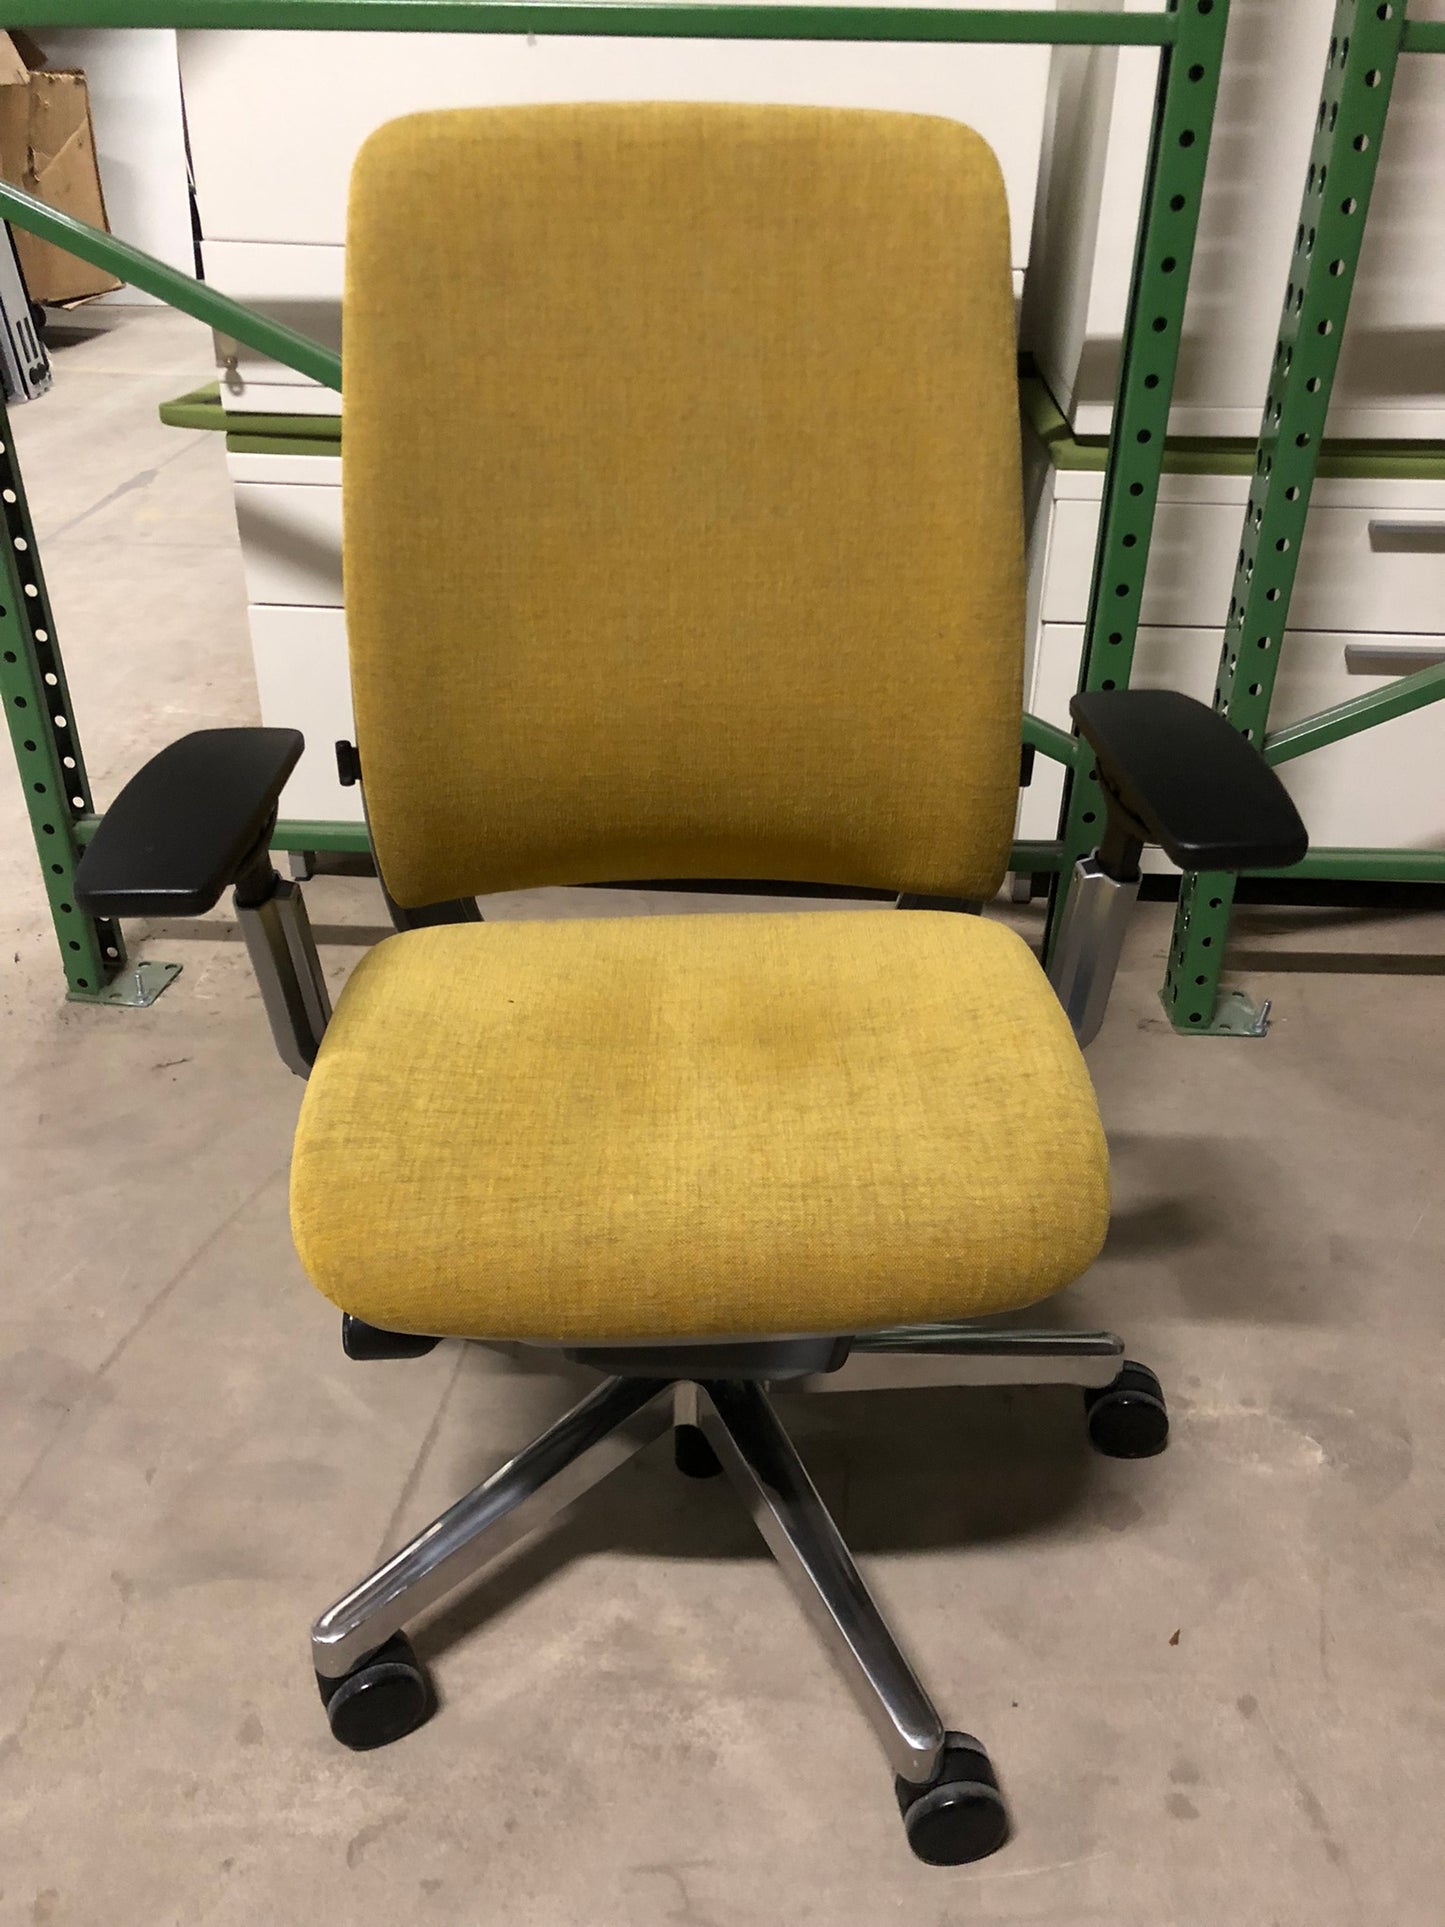 STEELCASE AMIA TASK CHAIR GOLD